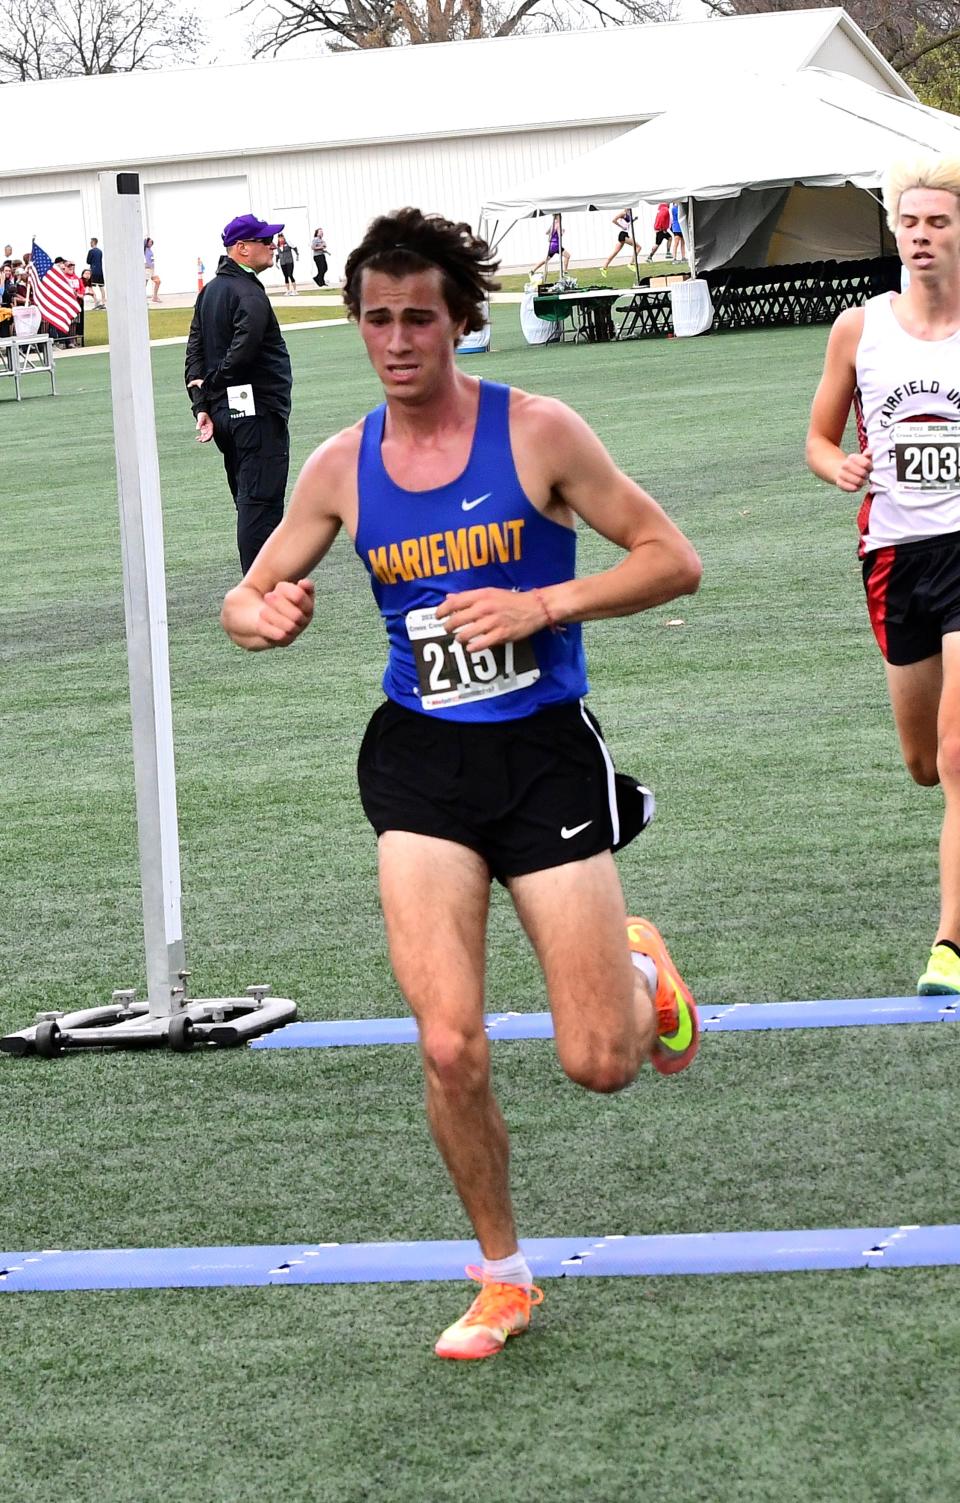 Mariemont's Bennett Turan ran a time of 16:16 at the OHSAA state cross country championships to finish in 13th place.